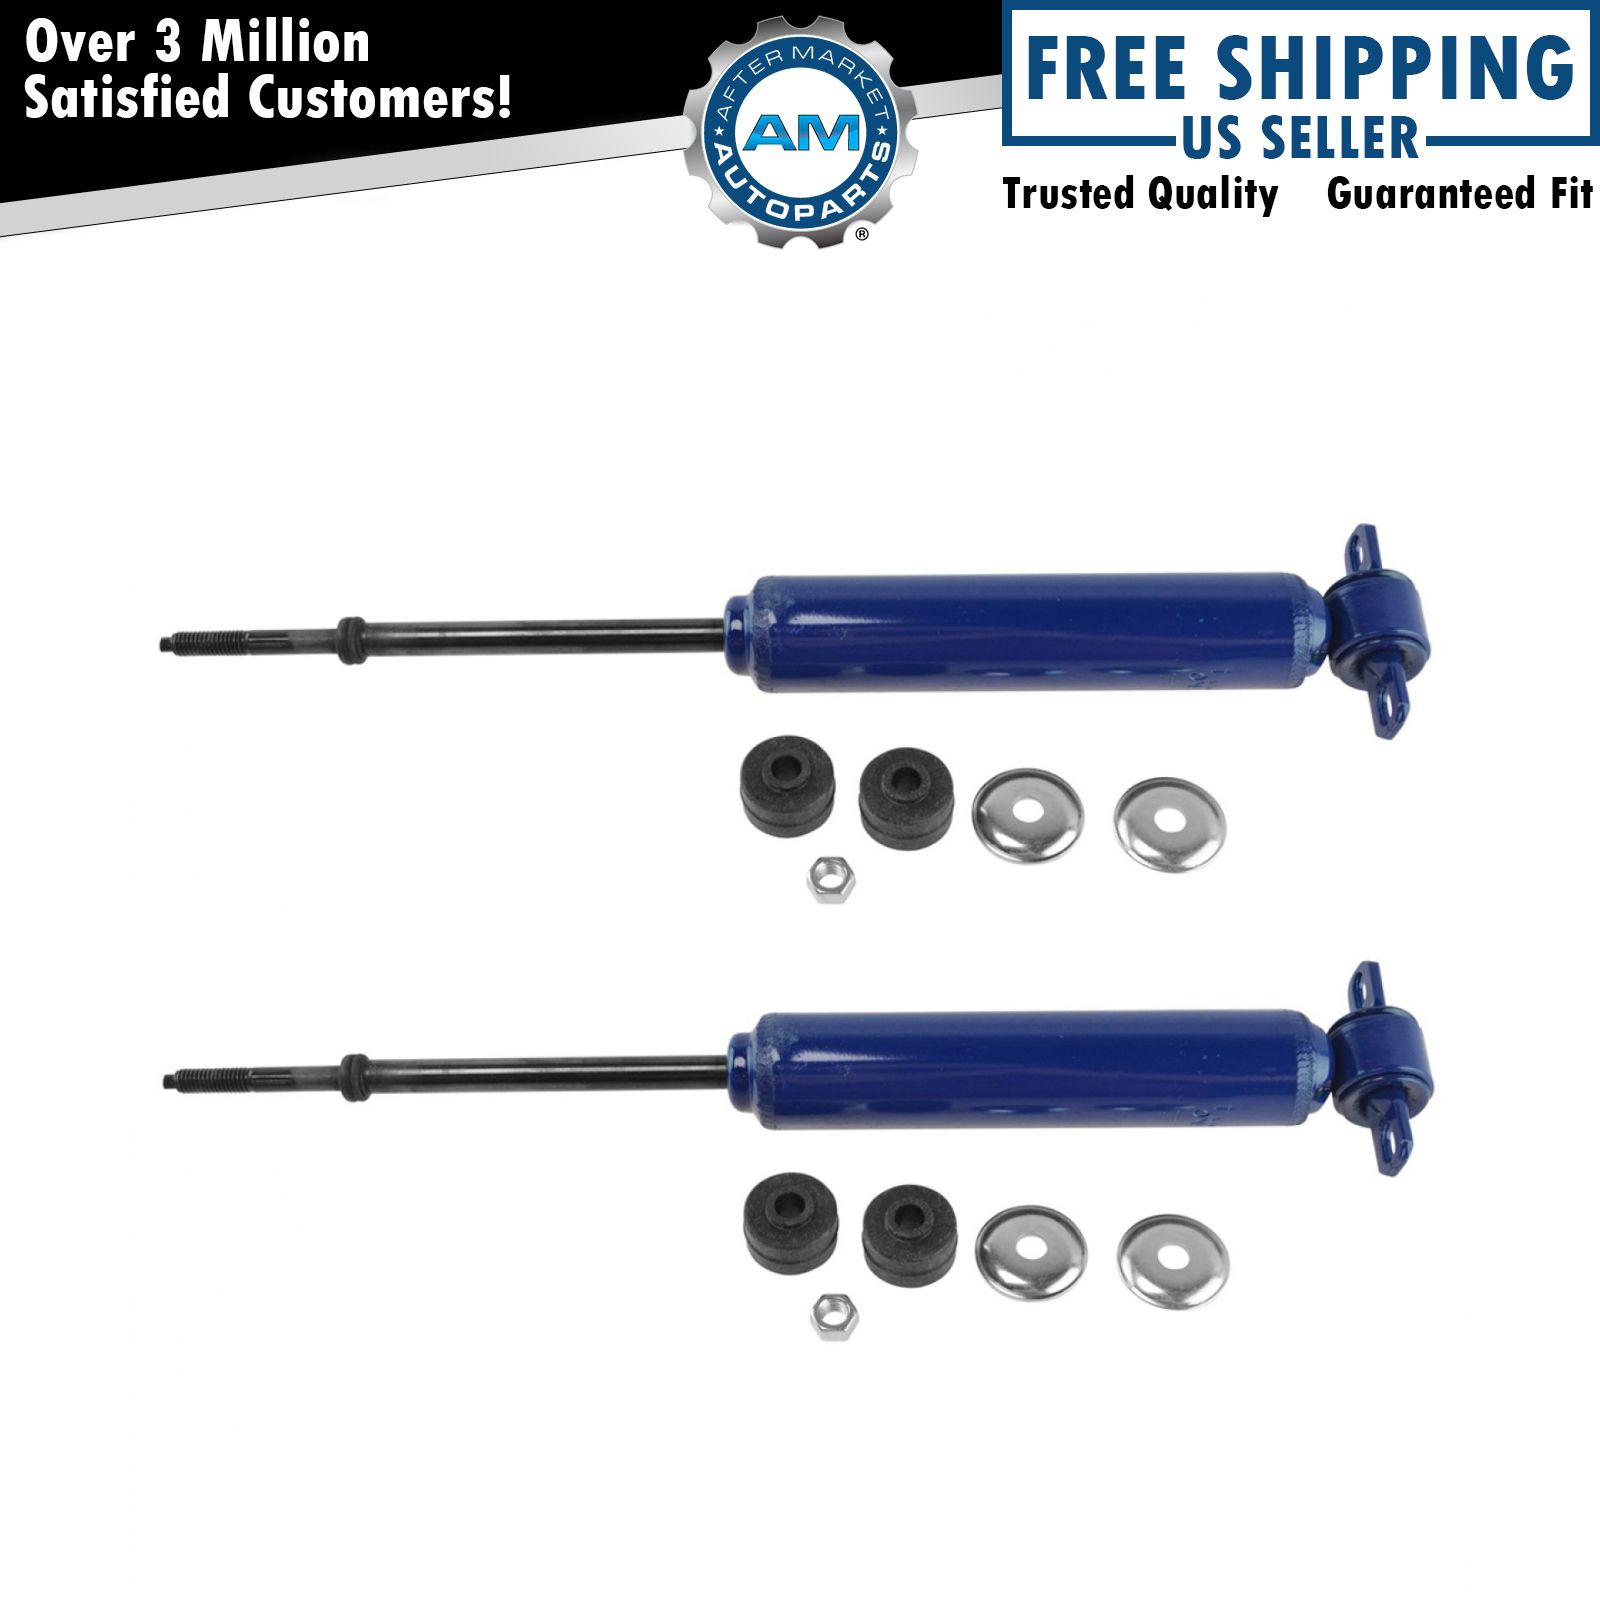 Monro-Matic Plus Front Shock Absorber LH RH Kit Pair Set of 2 for Ford GM Dodge